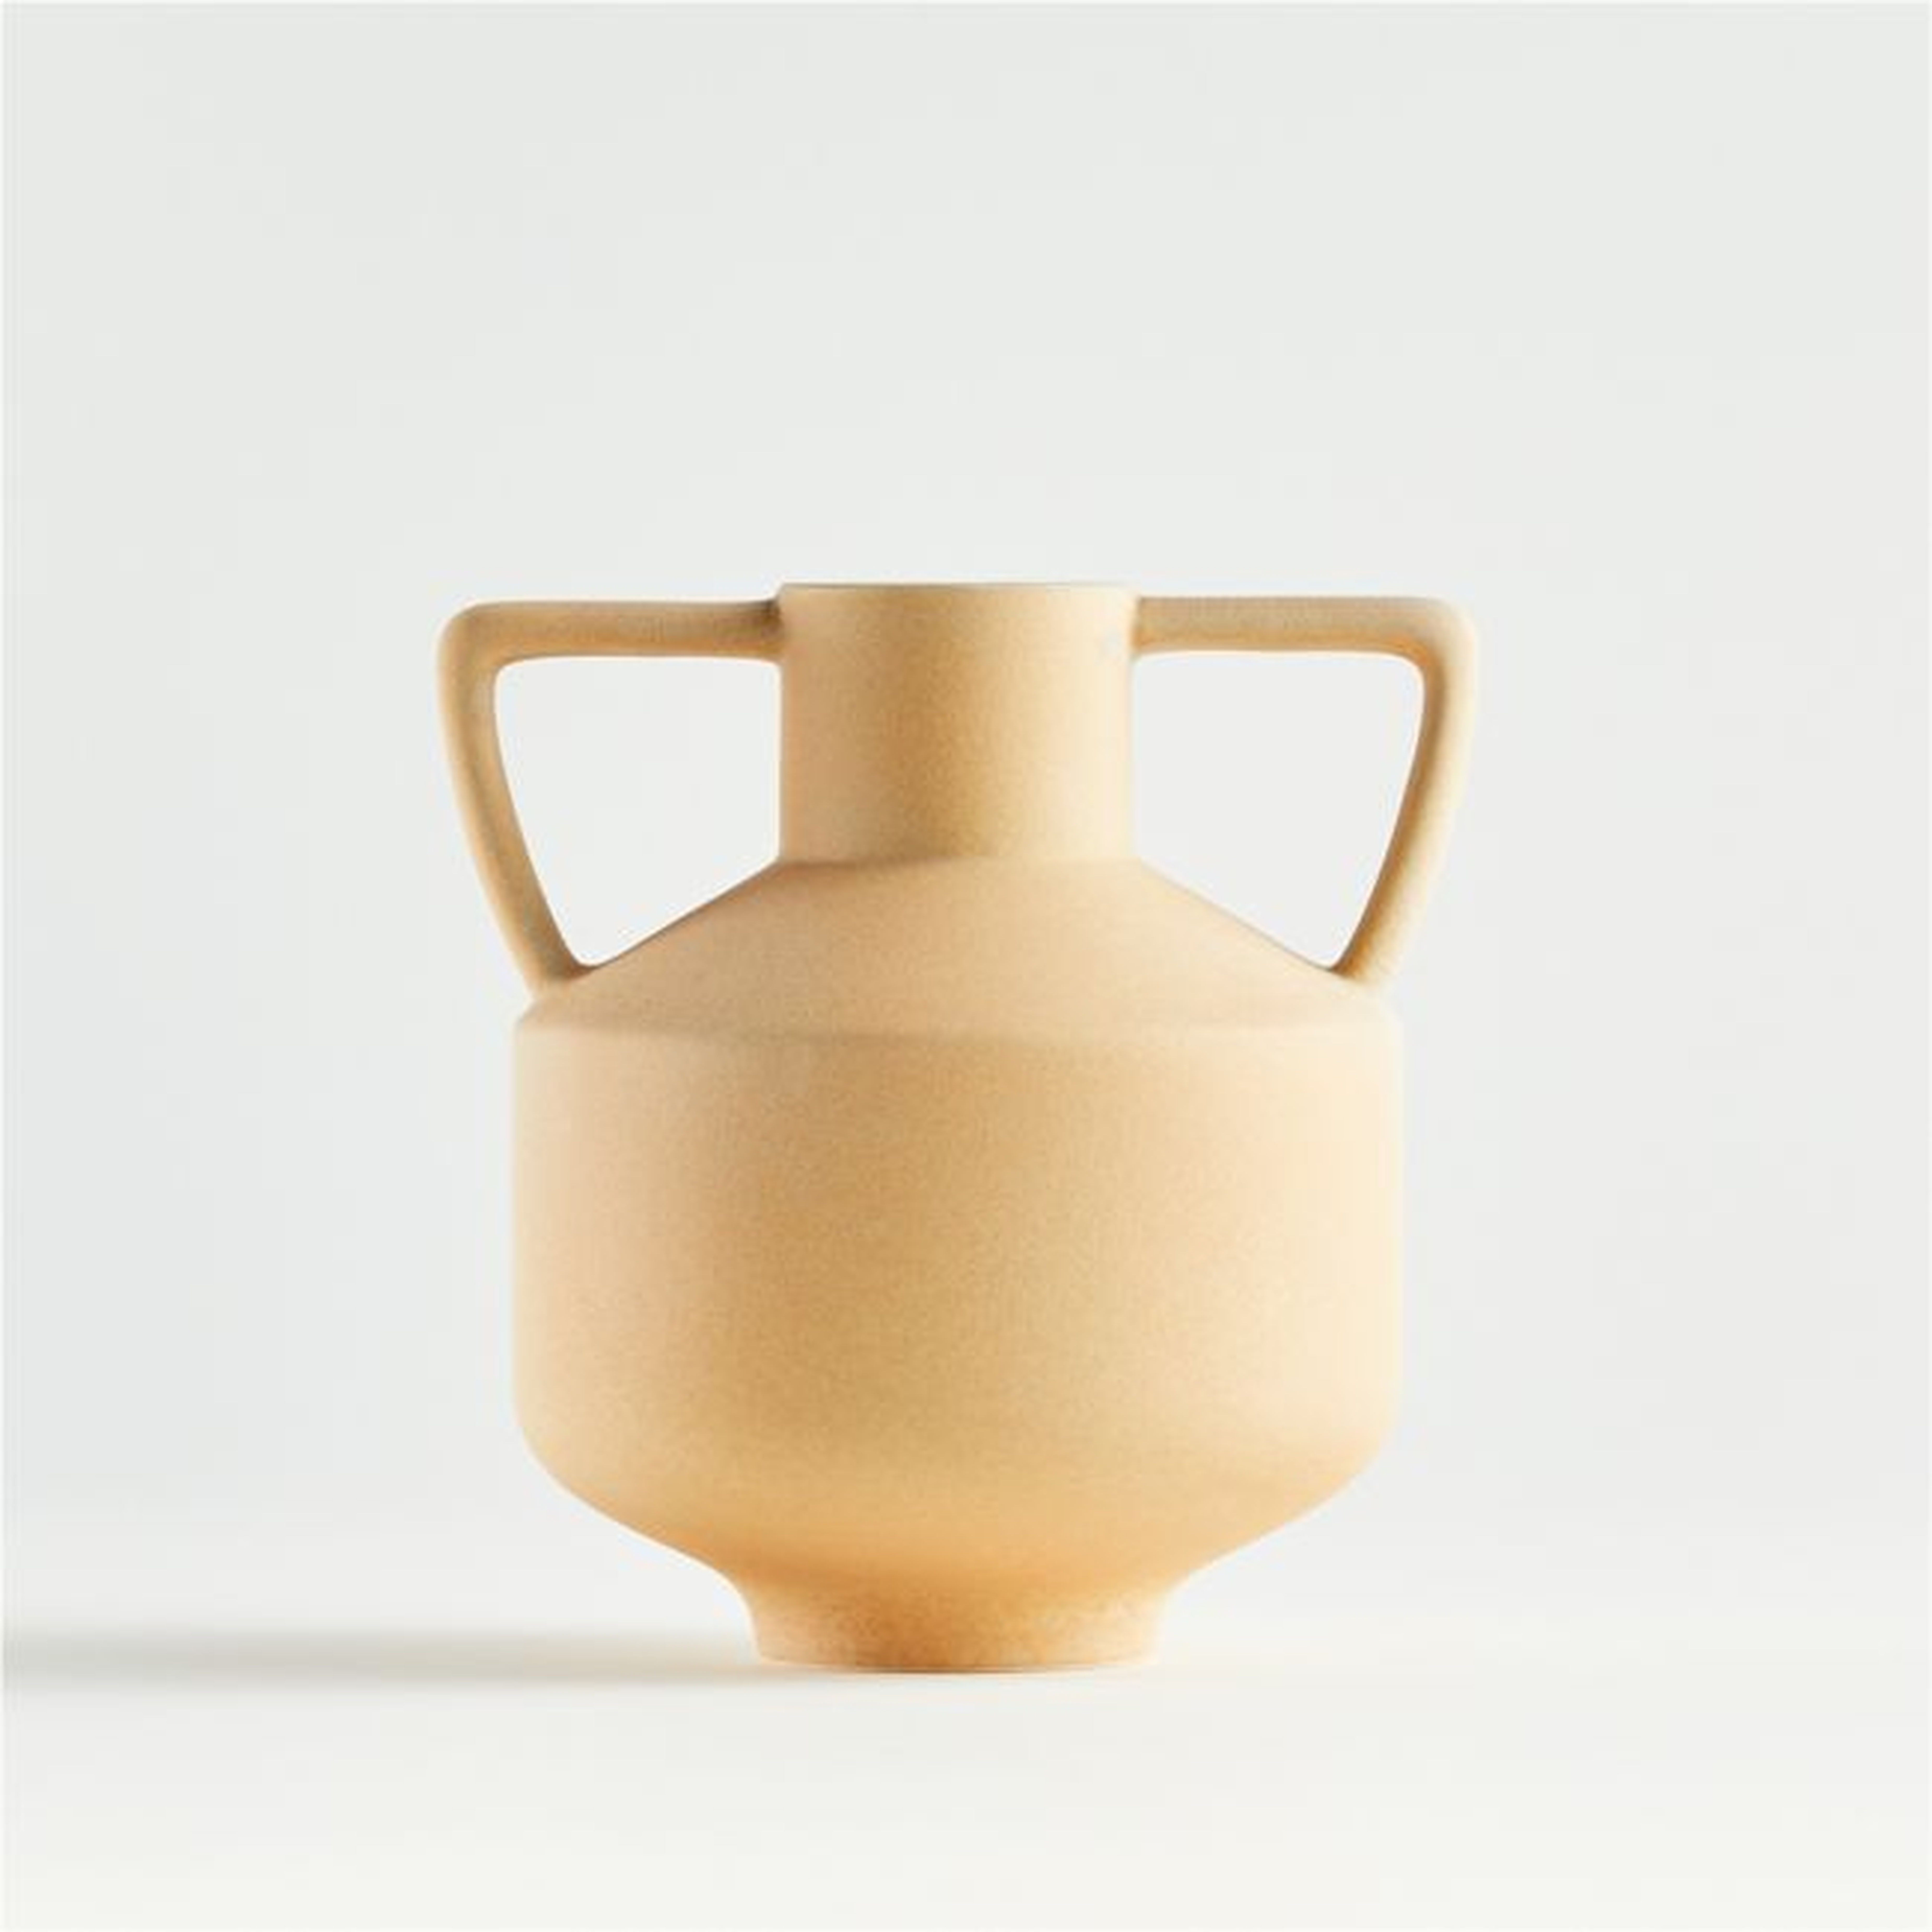 Olcott Small Yellow Vase with Handles - Crate and Barrel